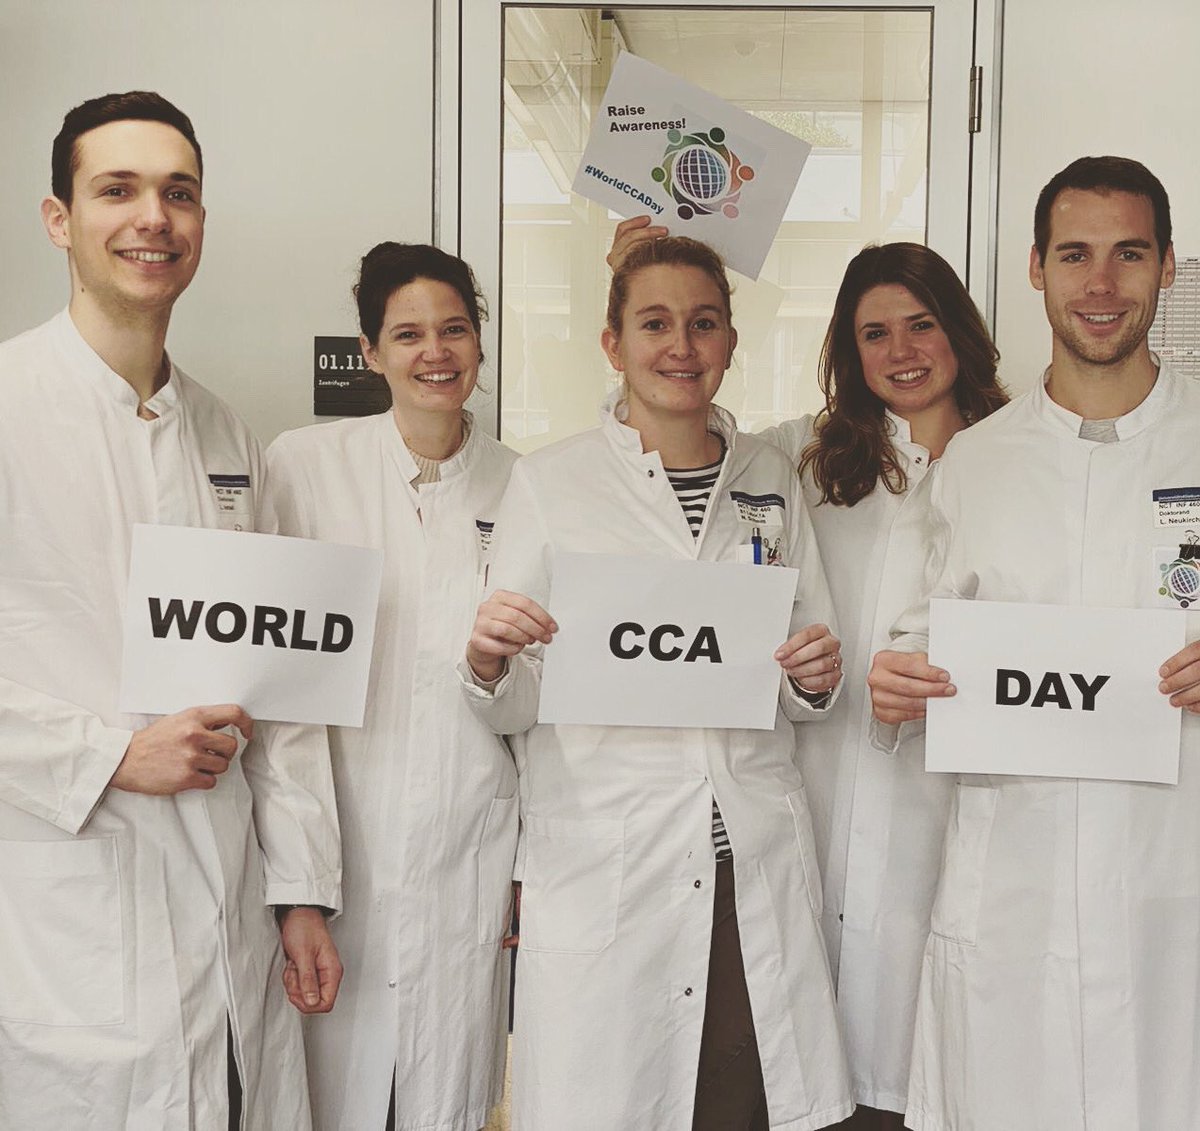 It’s #WorldCCADay!! 🌎
Let’s unite to advance basic and clinical research to offer patients better treatment options! Help to raise awareness  for this rare disease and celebrate the day with us! 🎉
#cholangiocarcinoma 
@CharityAMMF @CCA_Alliance @CcaEns @NCT_HD @EASLnews